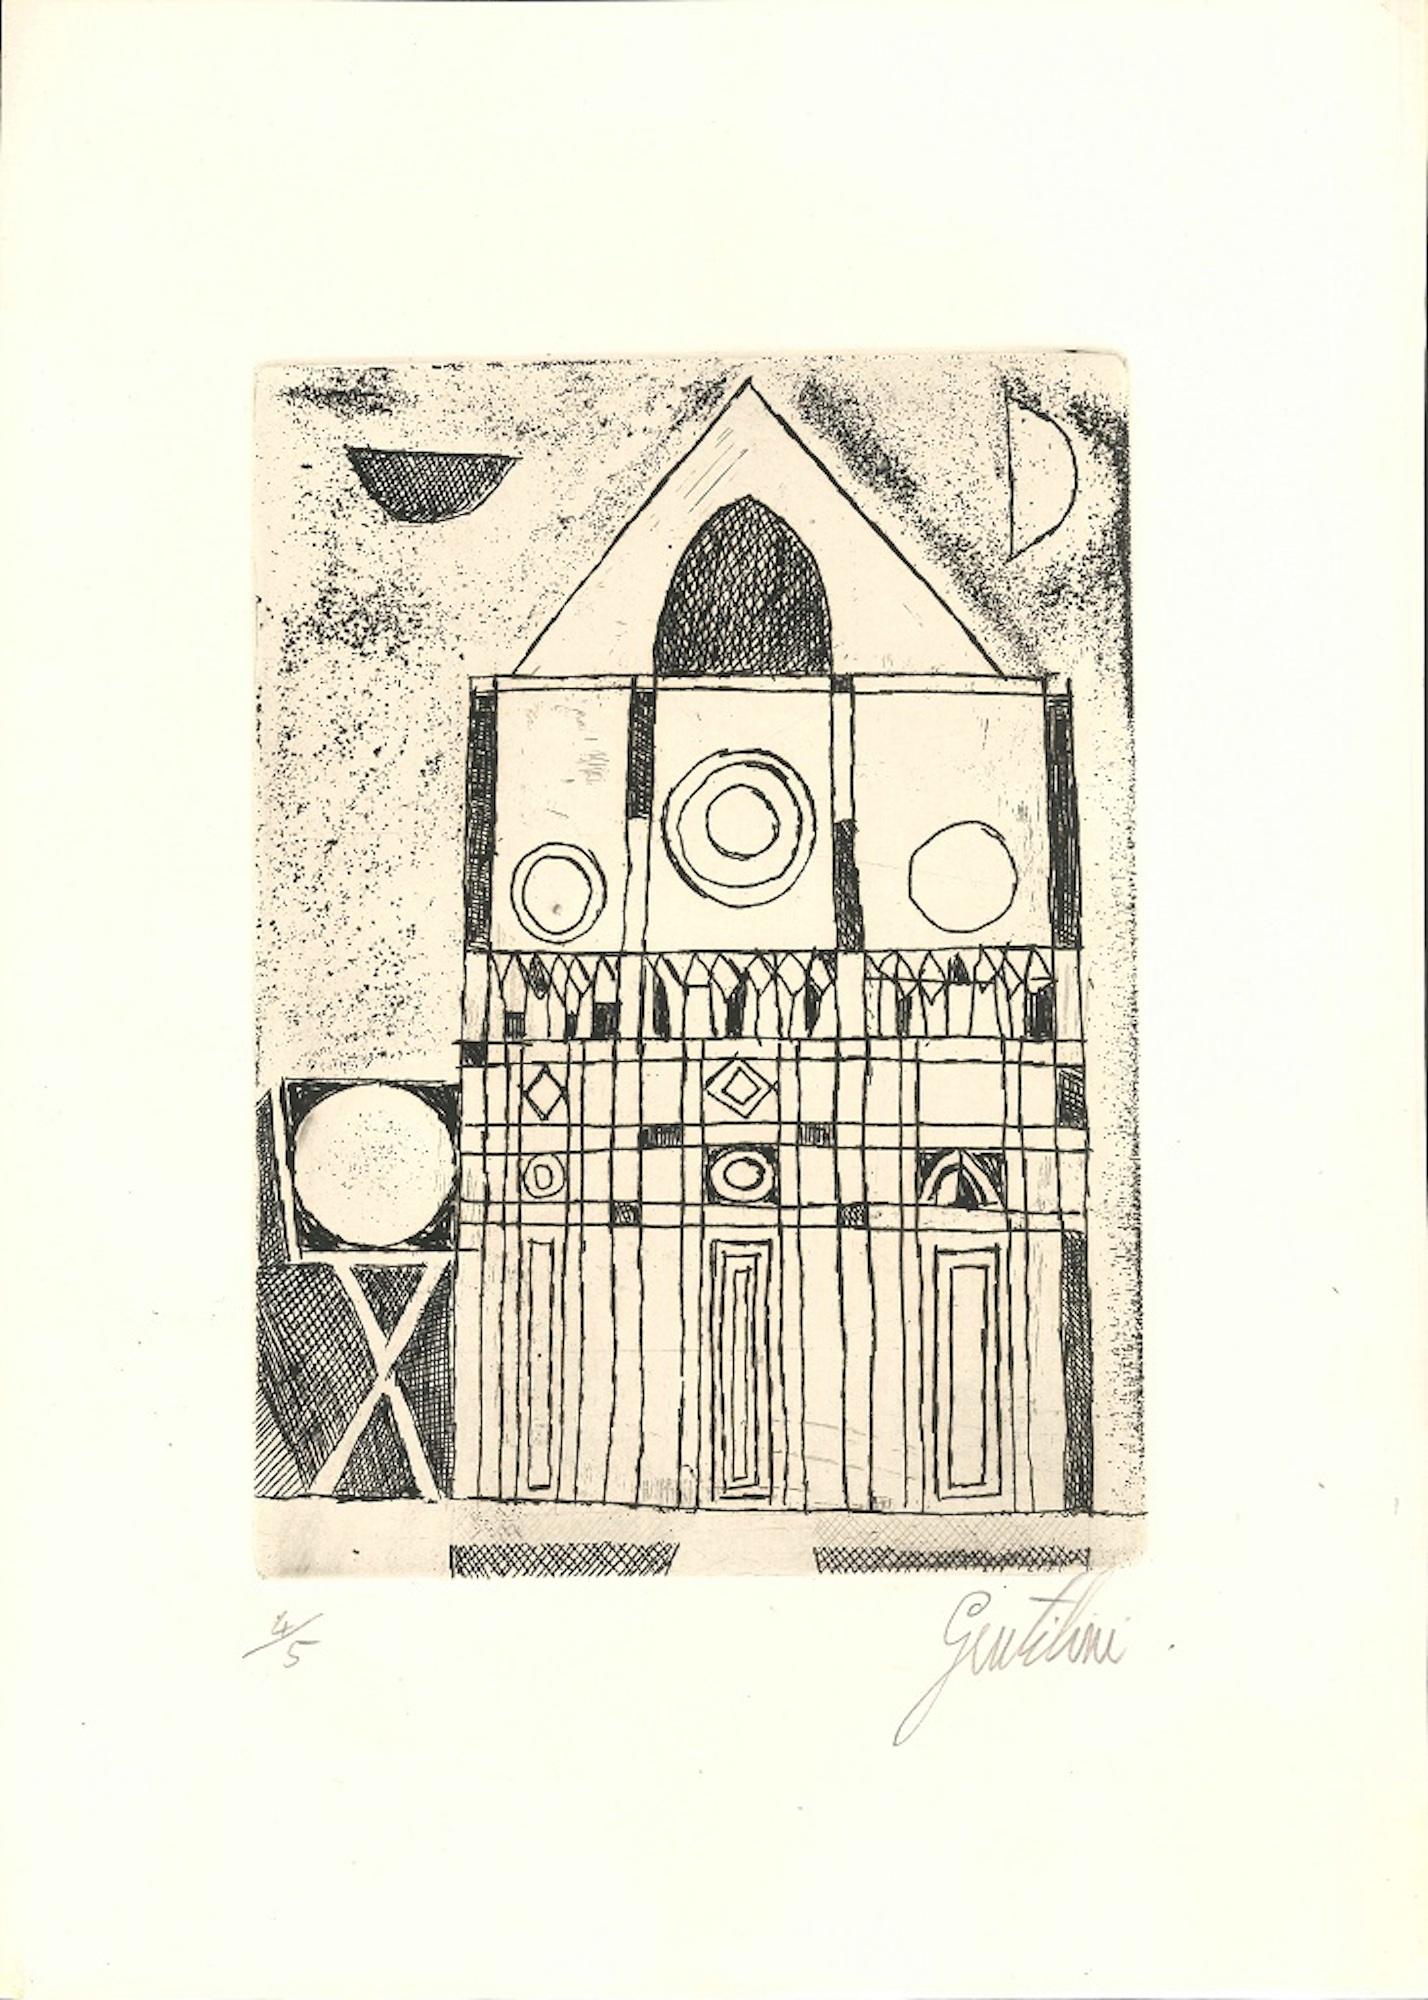 Image dimensions: 21 x 15 cm.

Beautiful Etching and Drypoint on ivory colored paper, representing a Church in a naïve style. Hand-numbered and hand-signed with pencil on lower margin by the Italian artist, Franco Gentilini. Edition of 5 prints. In